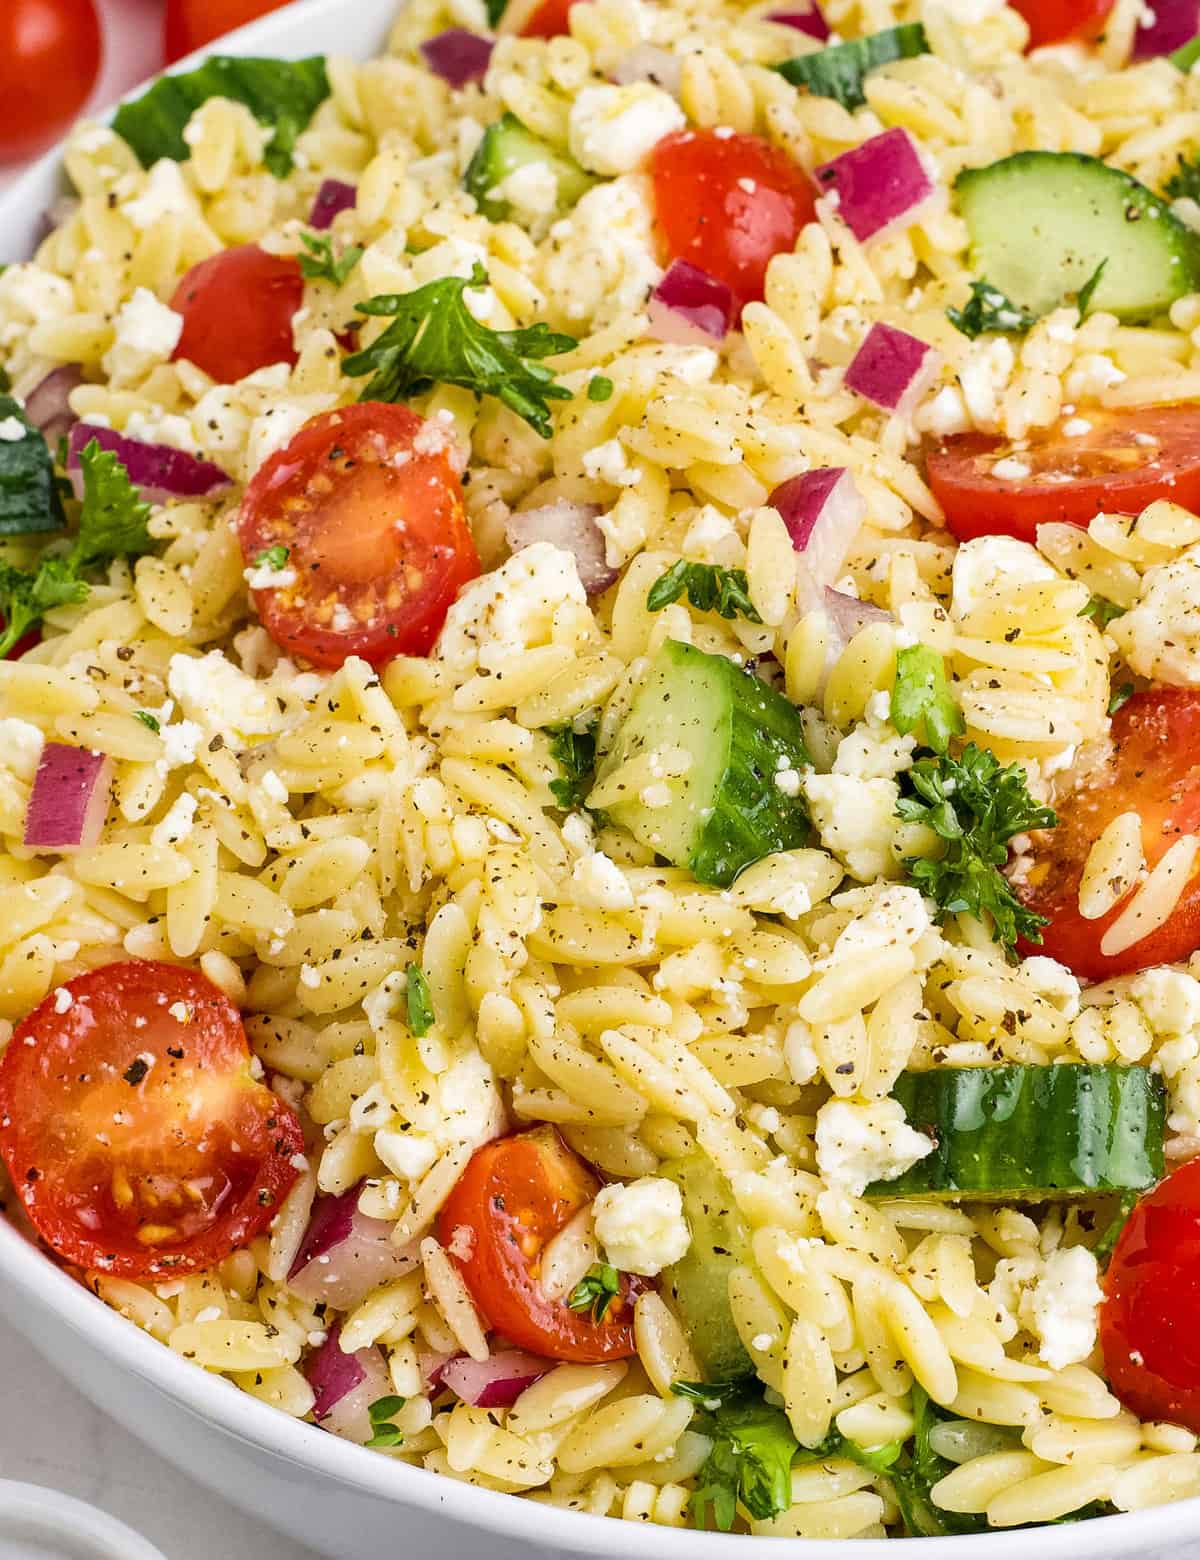 This light and easy to make lemon orzo salad is the perfect make-ahead pasta salad. Made with a tangy and slightly sweet lemon vinaigrette, this side dish is full of fresh produce like cucumbers and cherry tomatoes and packed with bold, yet simple flavors.